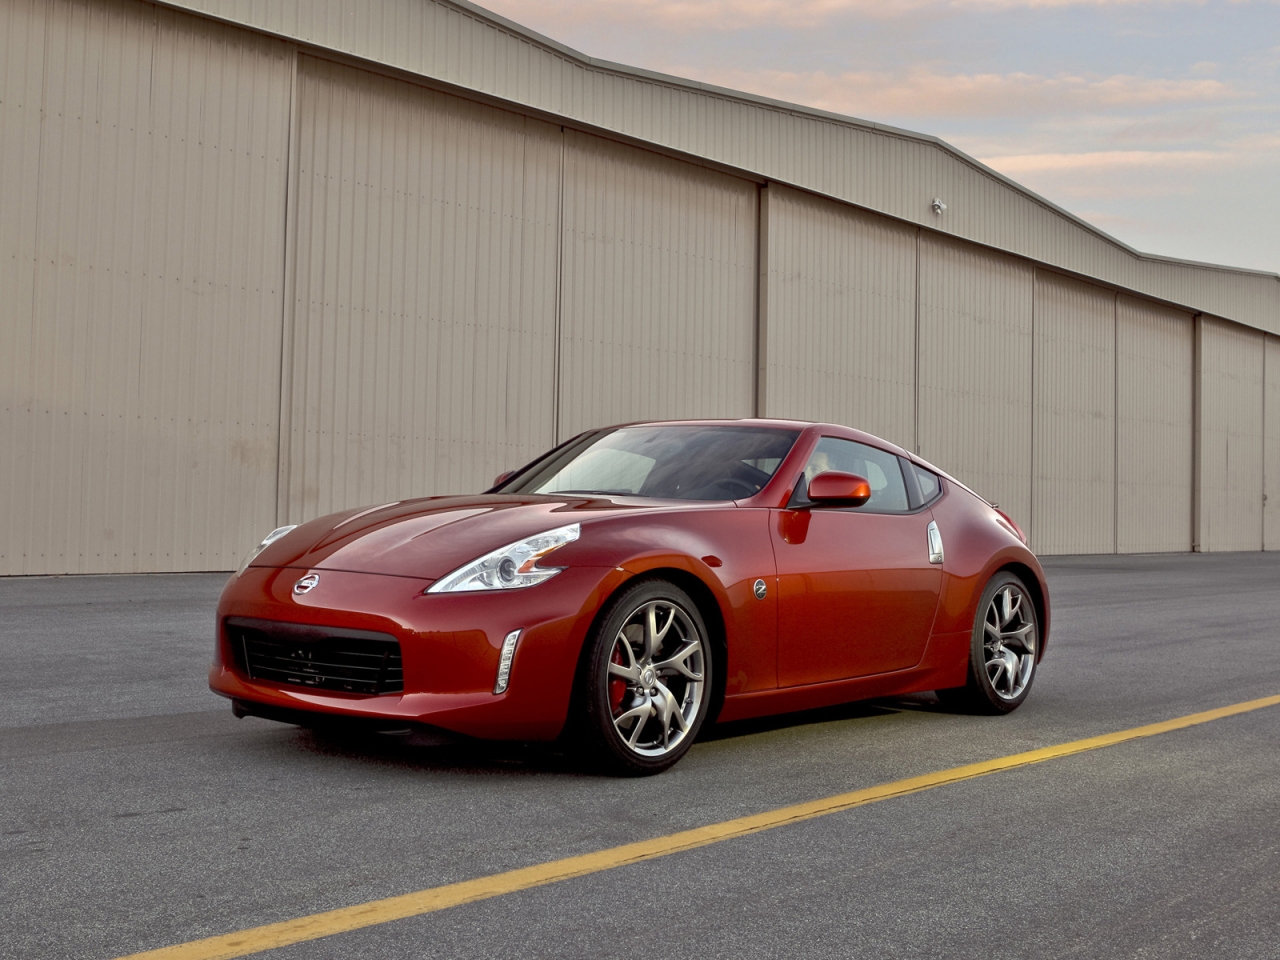 2013 Nissan 370Z Magma Red for 1280 x 960 resolution